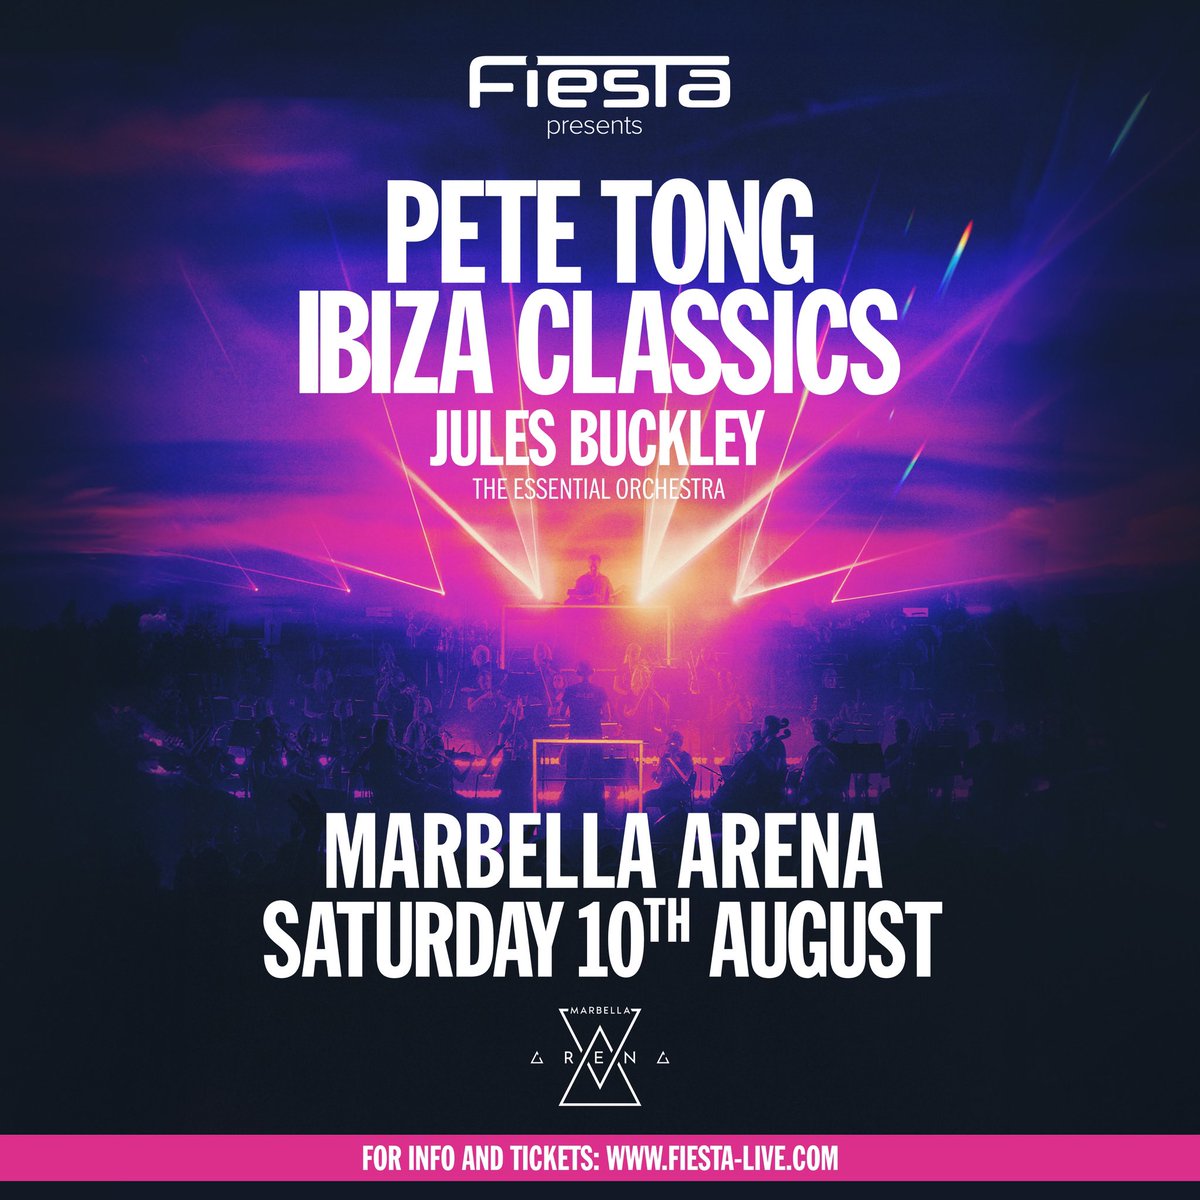 .@IbizaClassics_ is coming to Marbella, Spain on Saturday 10th Aug where I’ll be joined by @julesbuckley and the #EssentialOrchestra events.liveit.io/fiesta/fiesta-…